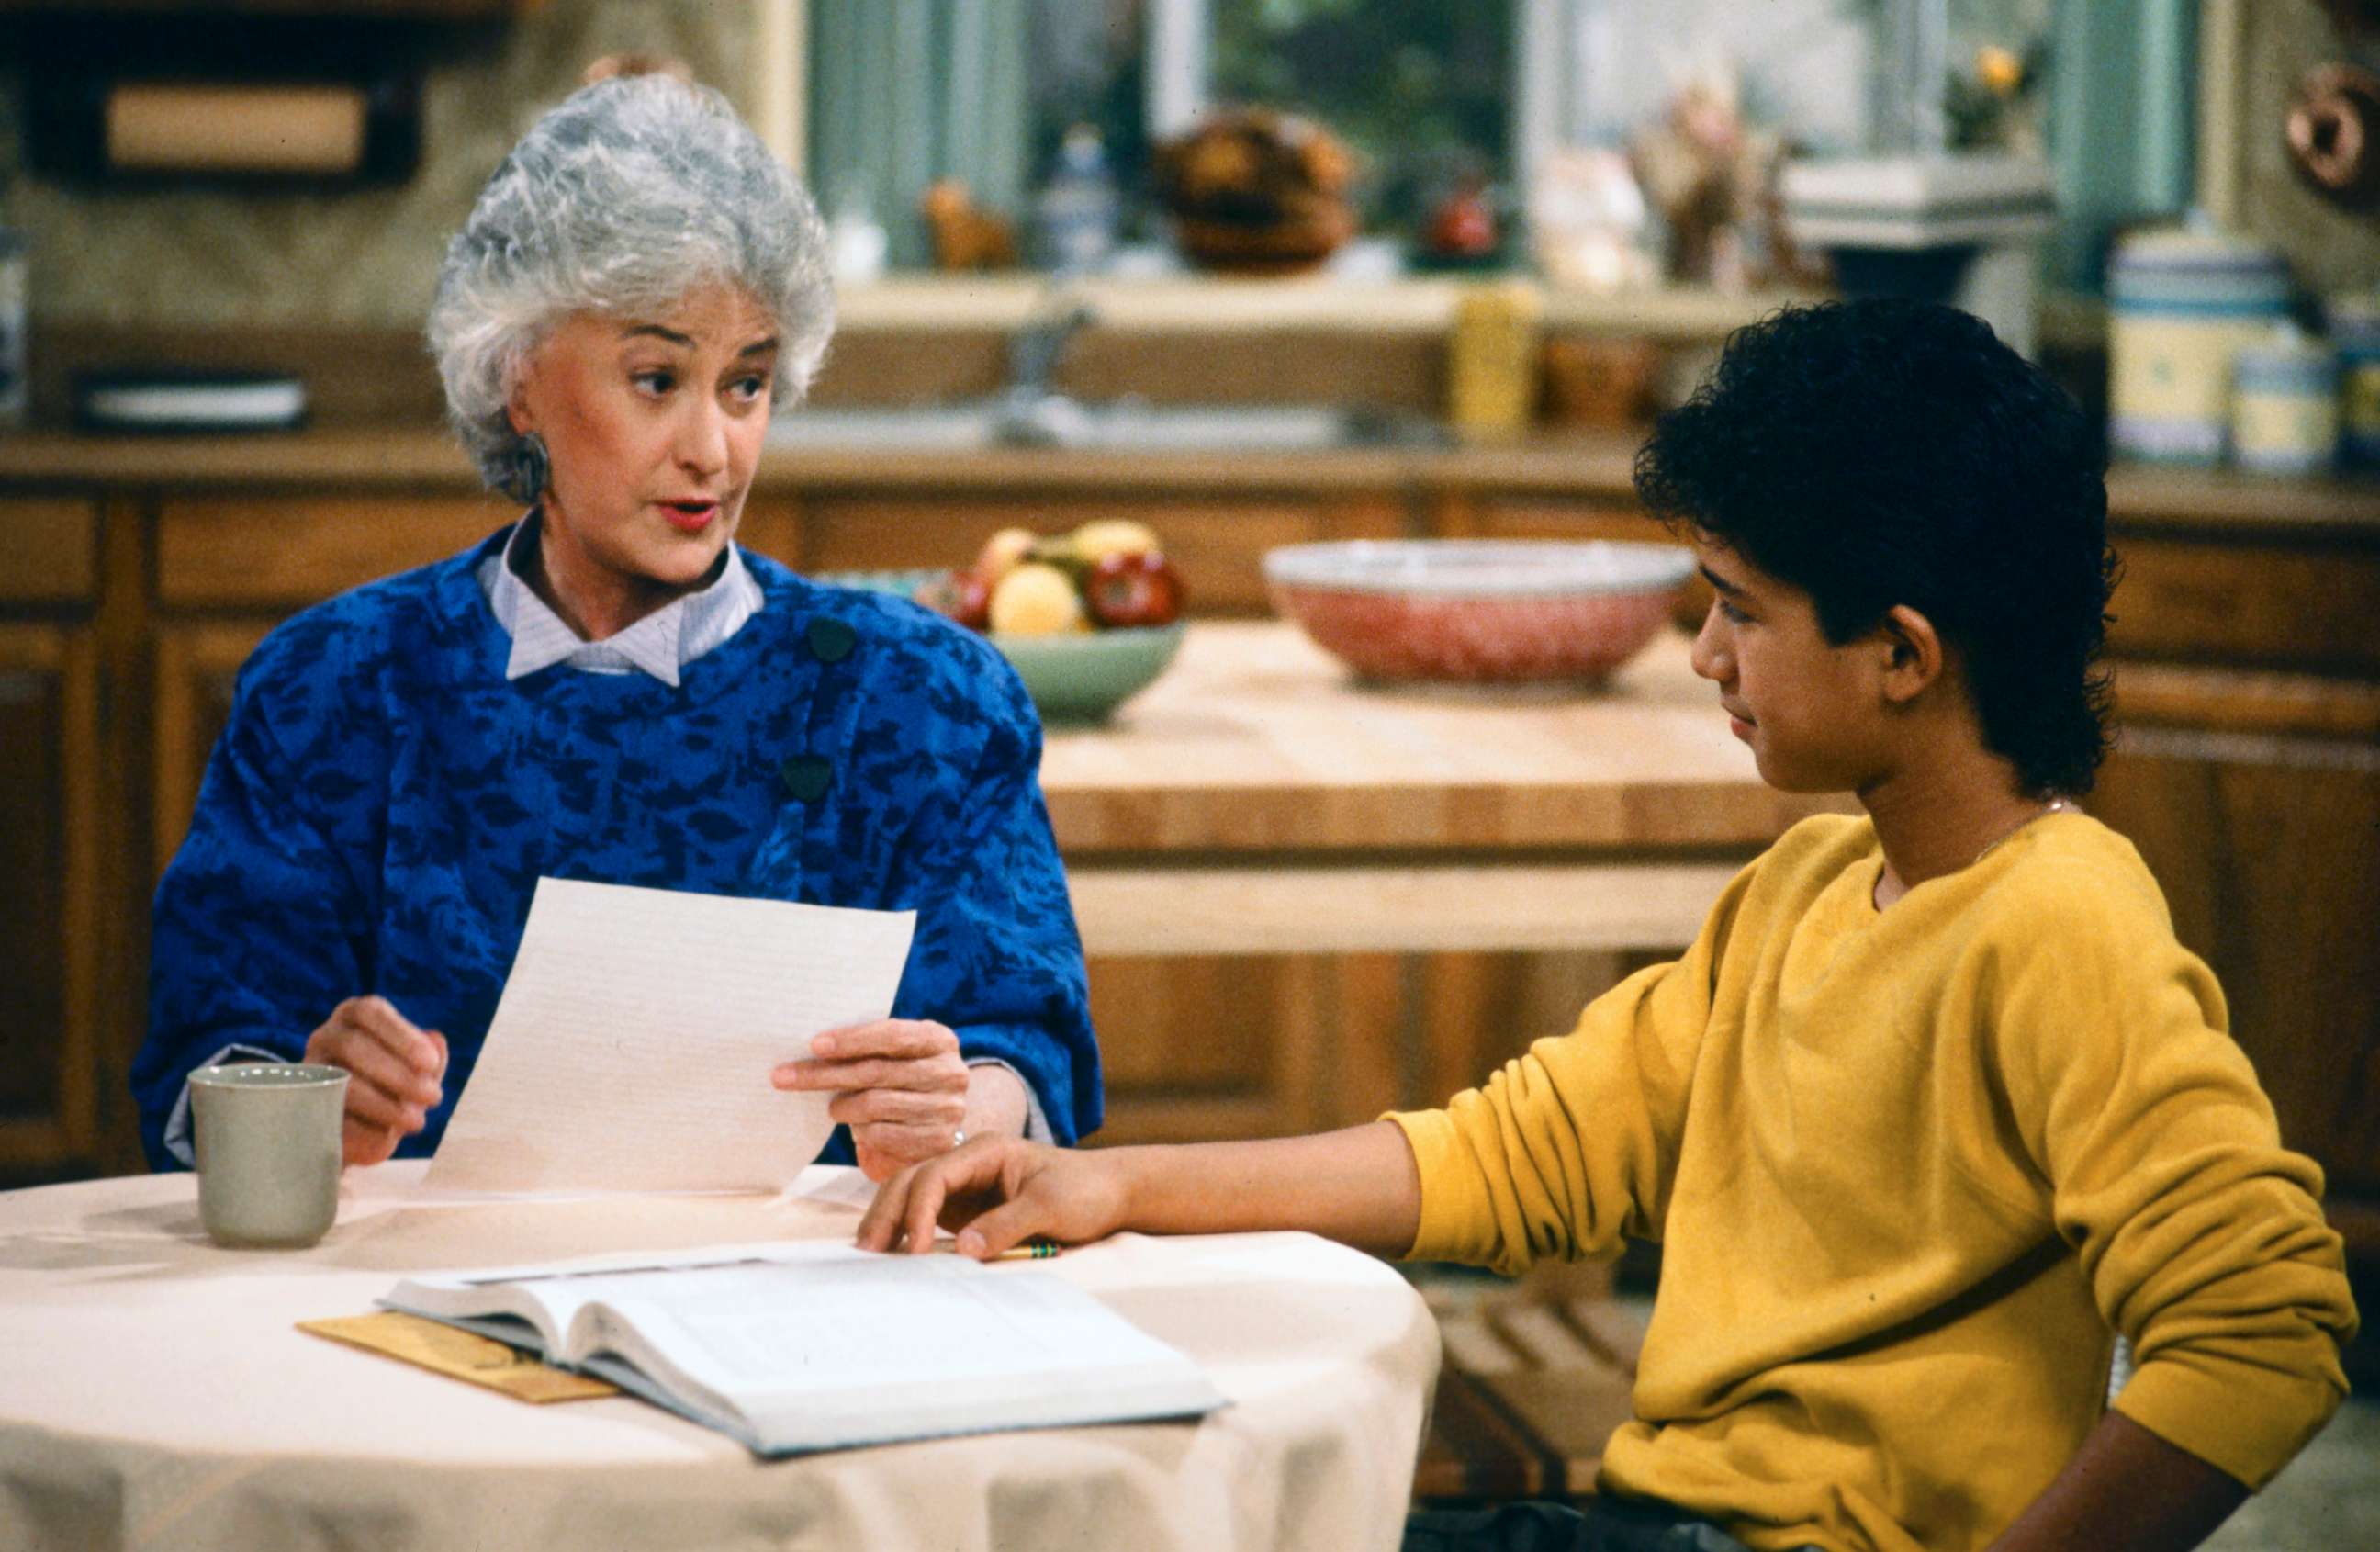 PHOTO: Bea Arthur played Dorothy Zbornak in "The Golden Girls" from 1985-1992.